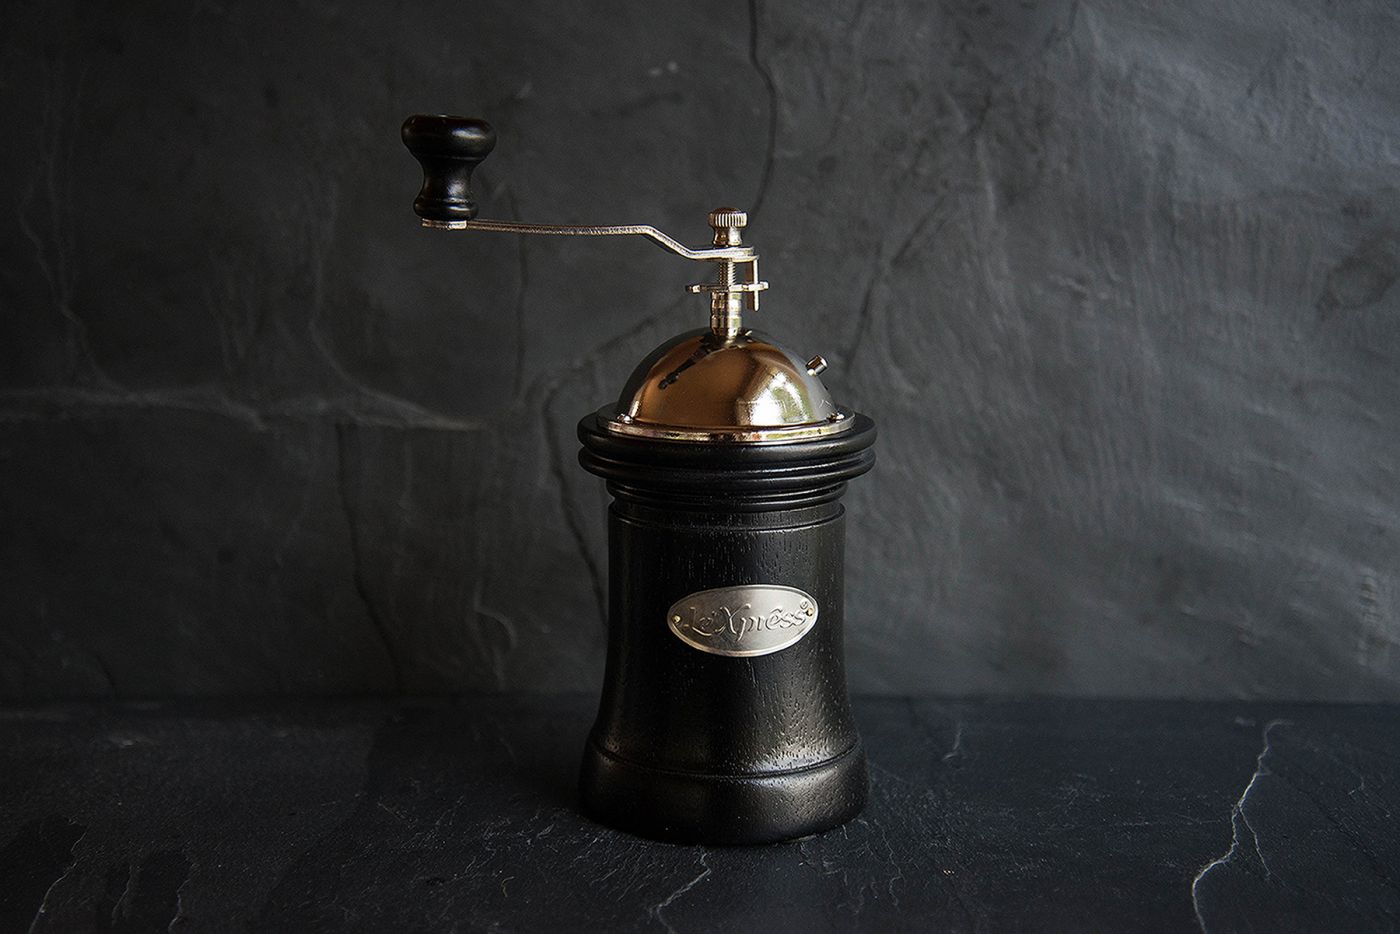 Le 'Xpress Hand Coffee Mill